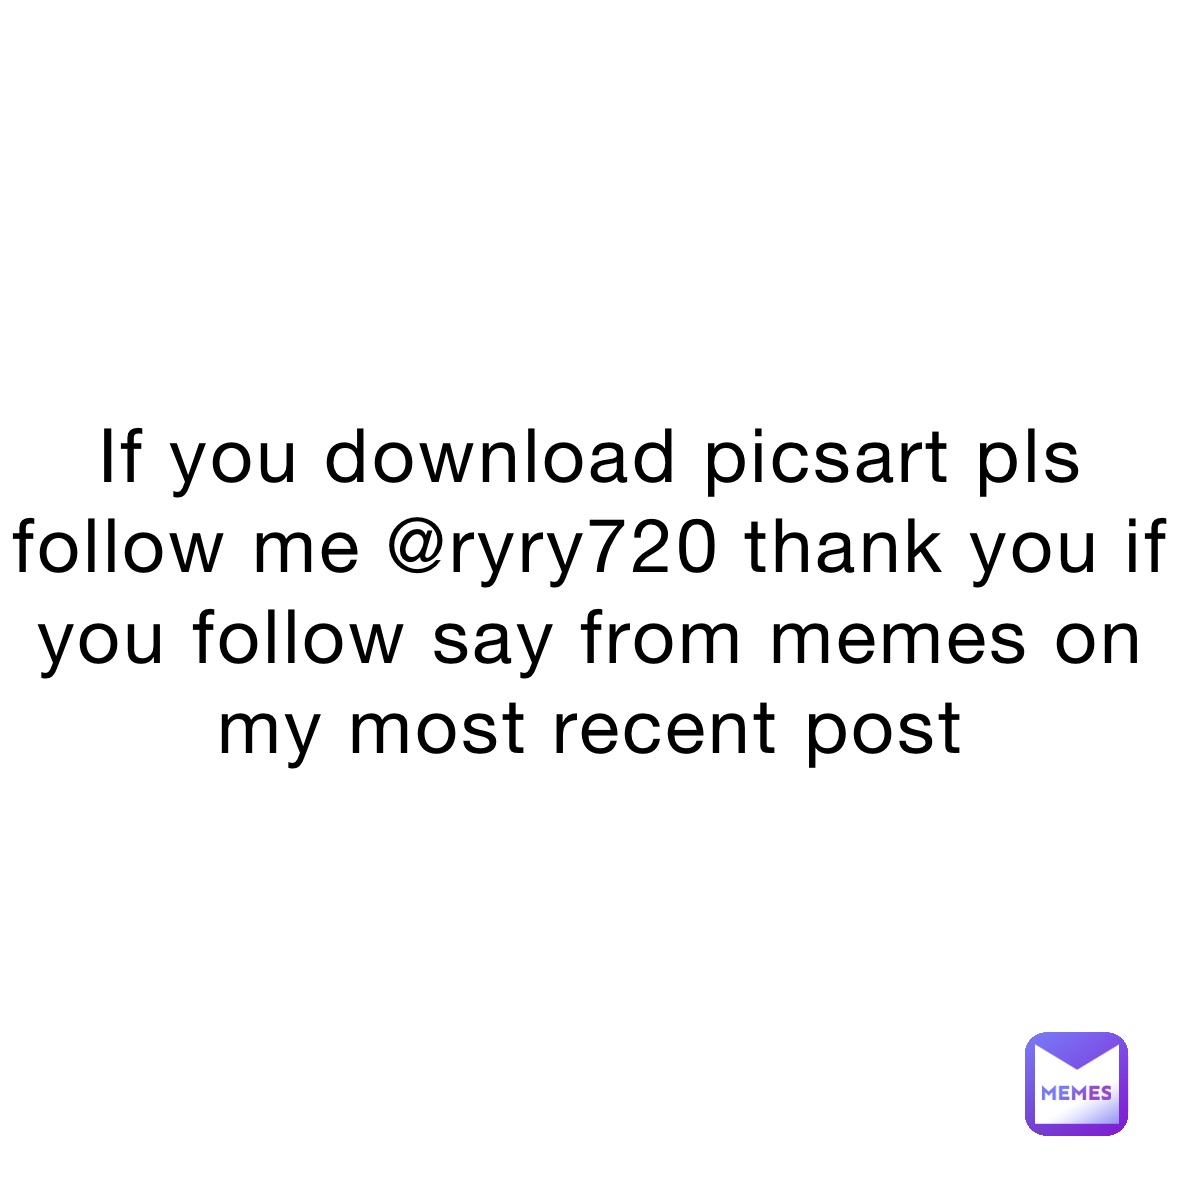 If you download picsart pls follow me @ryry720 thank you if you follow say from memes on my most recent post